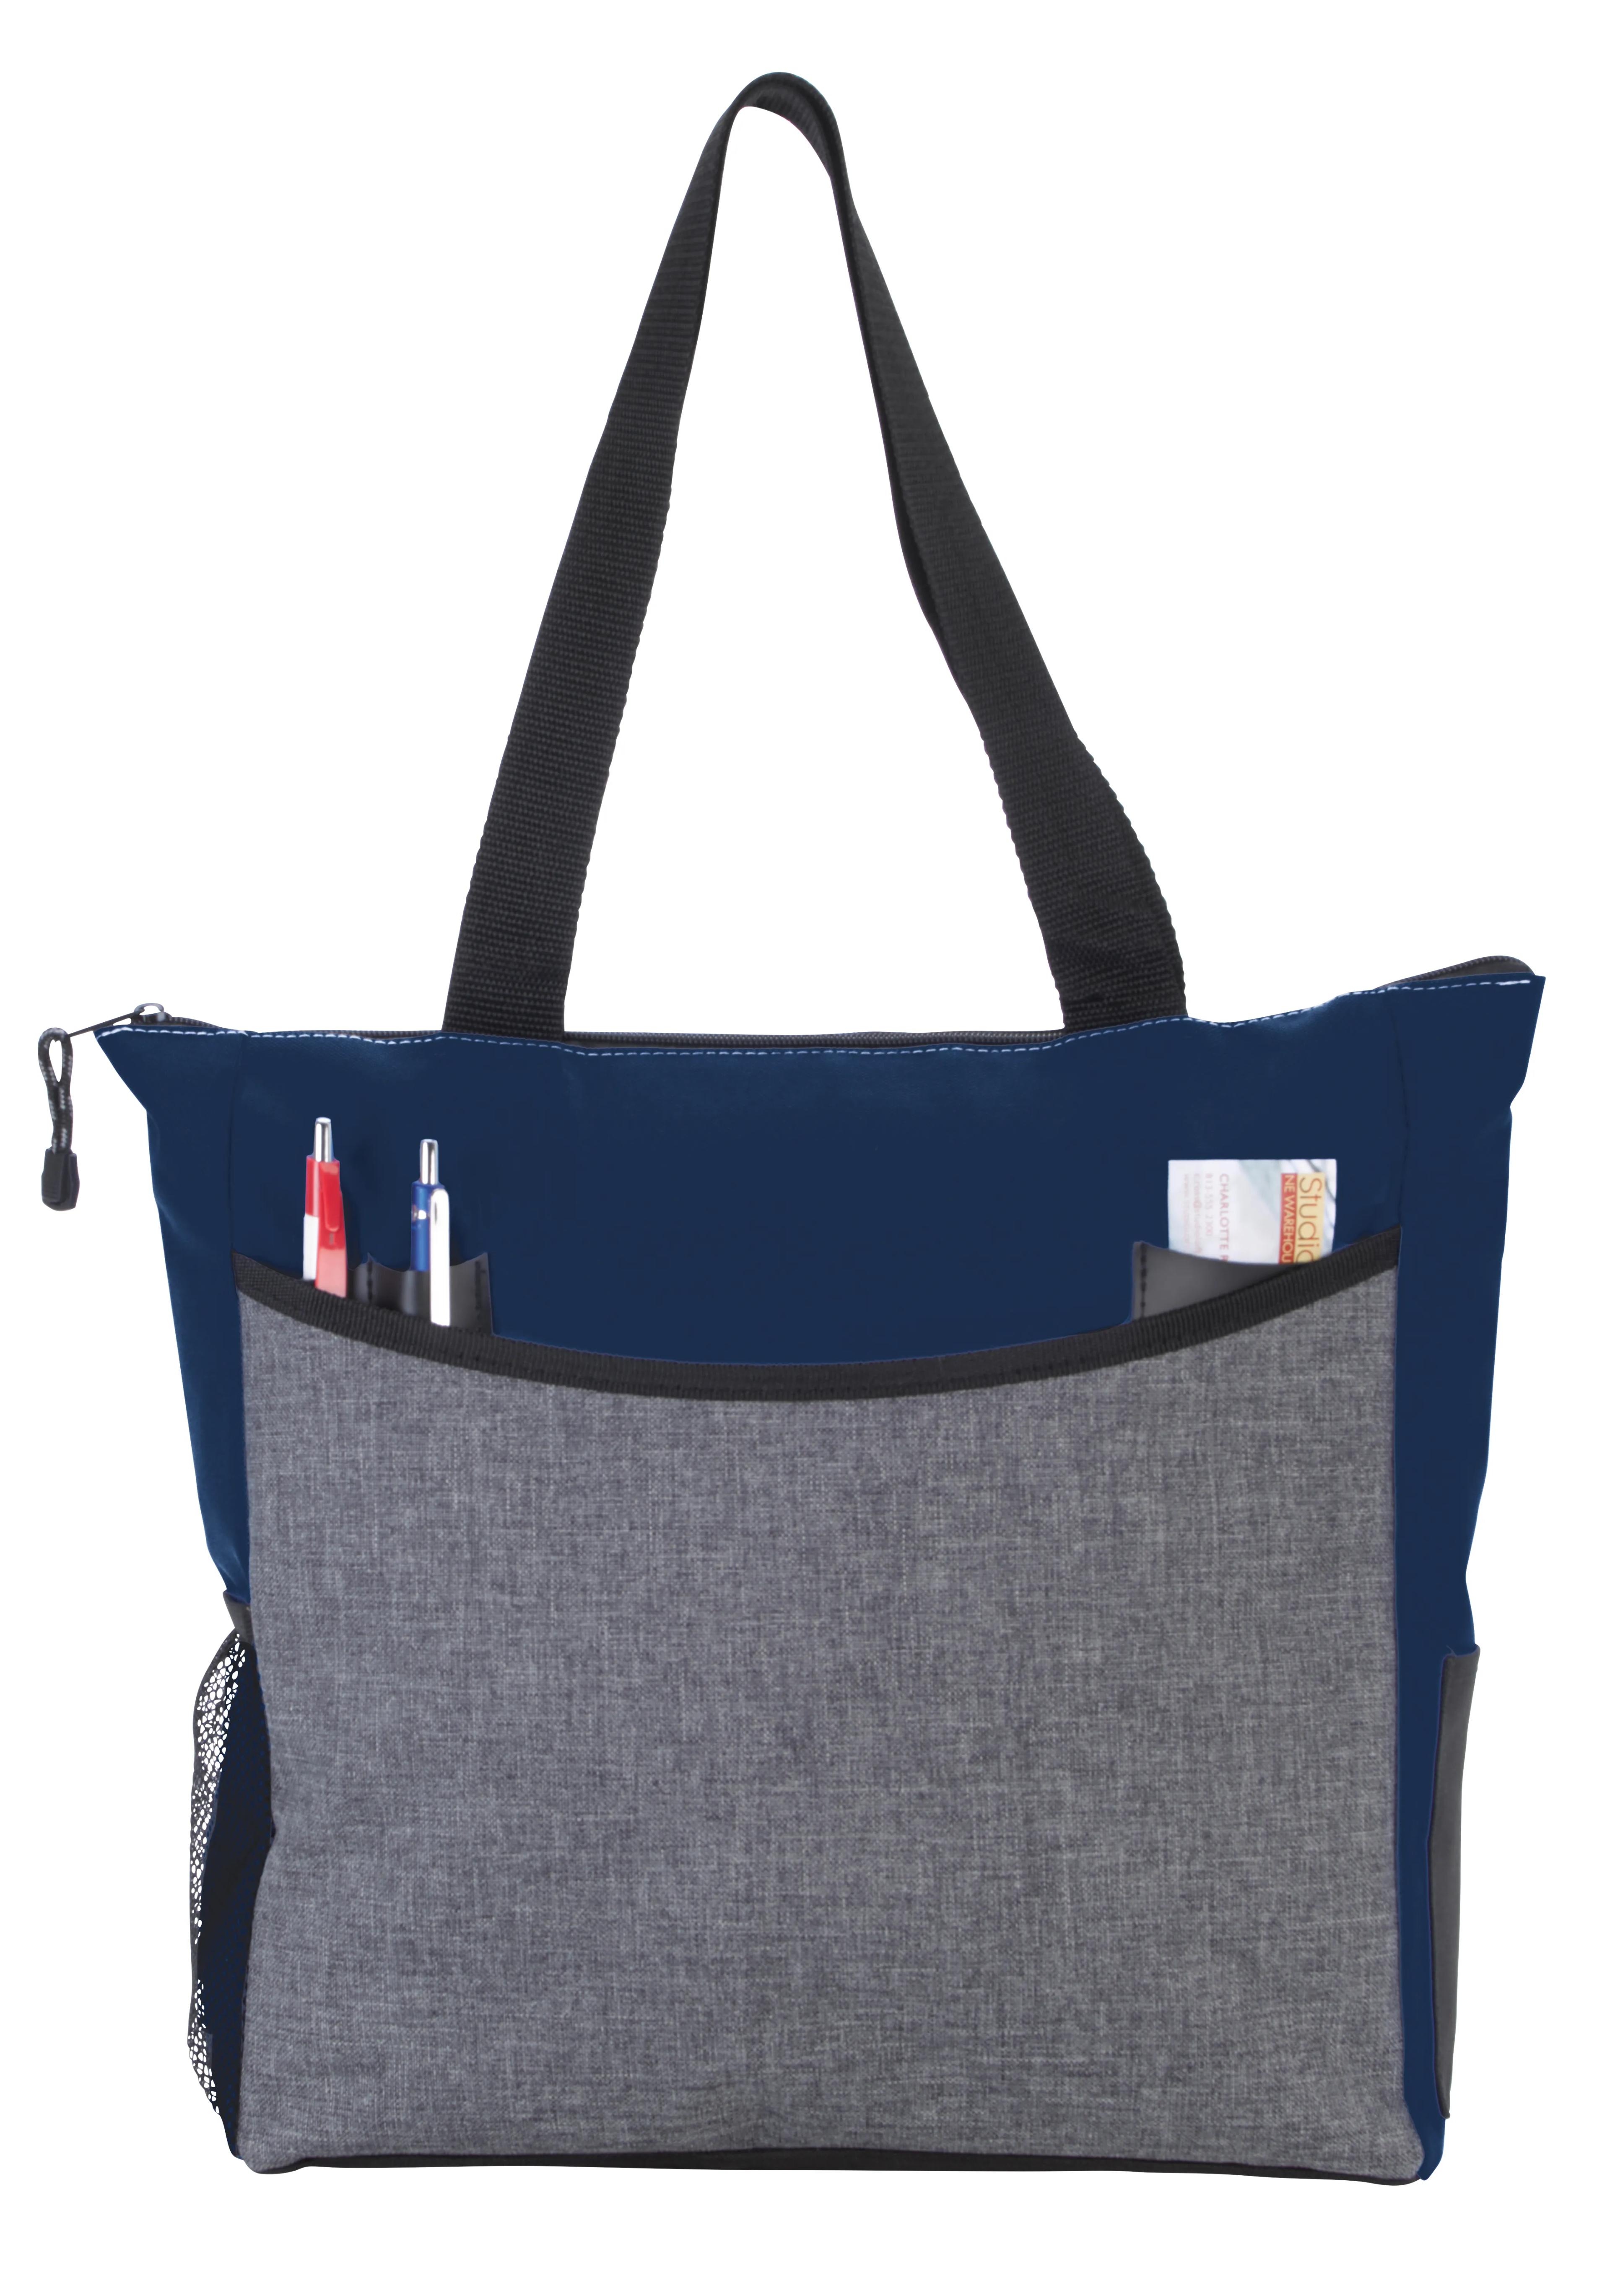 Two-Tone TranSport It Tote 15 of 29